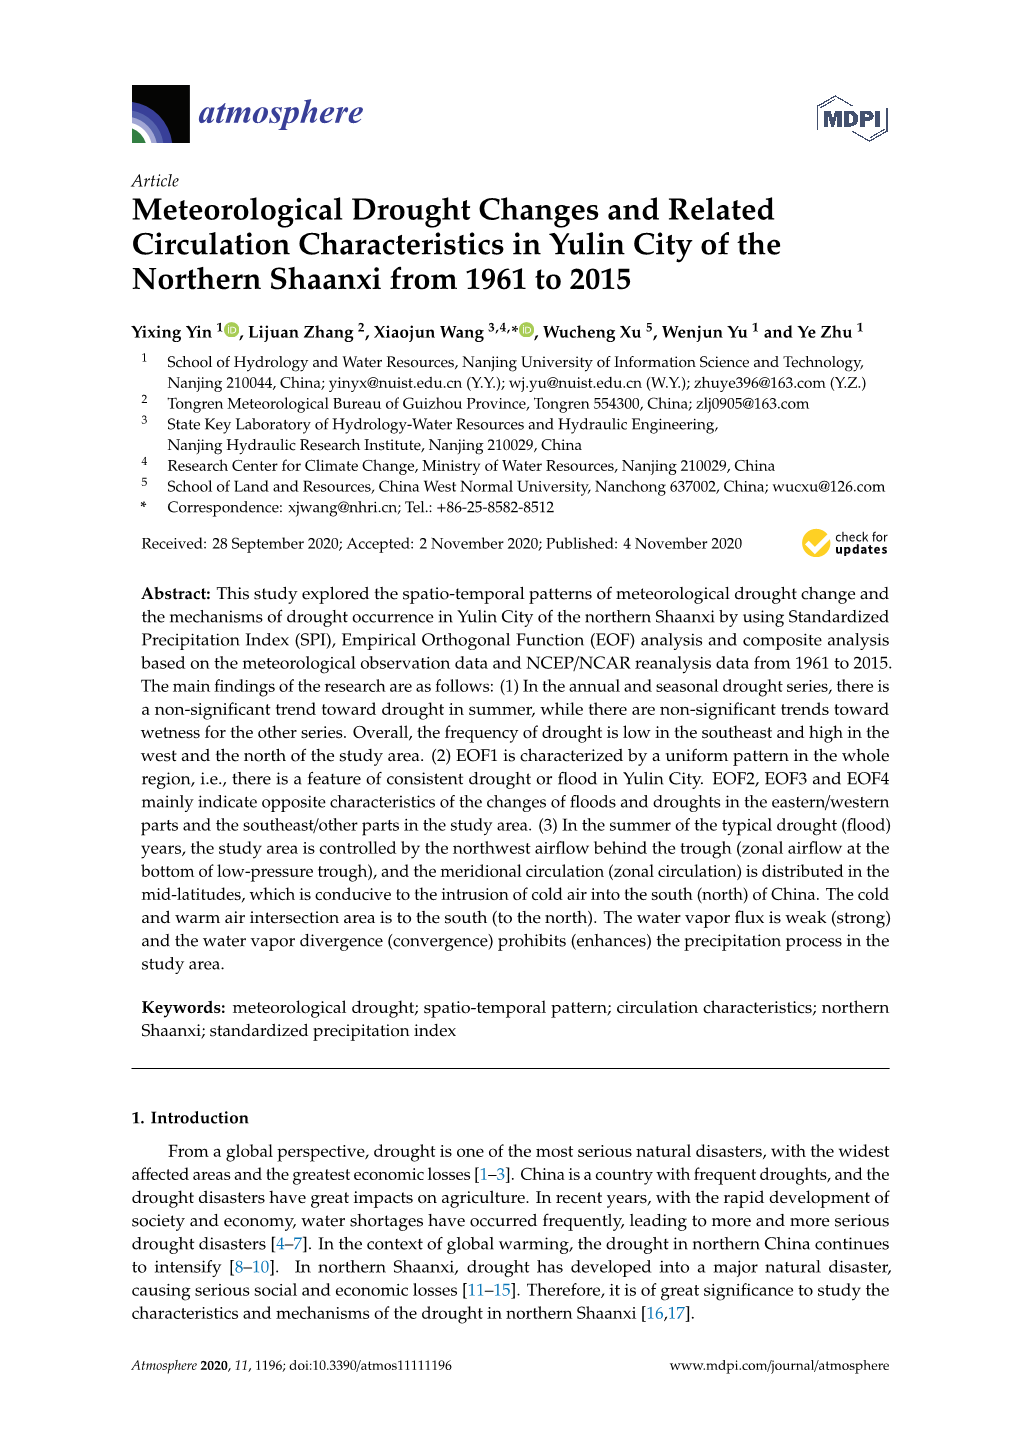 Meteorological Drought Changes and Related Circulation Characteristics in Yulin City of the Northern Shaanxi from 1961 to 2015